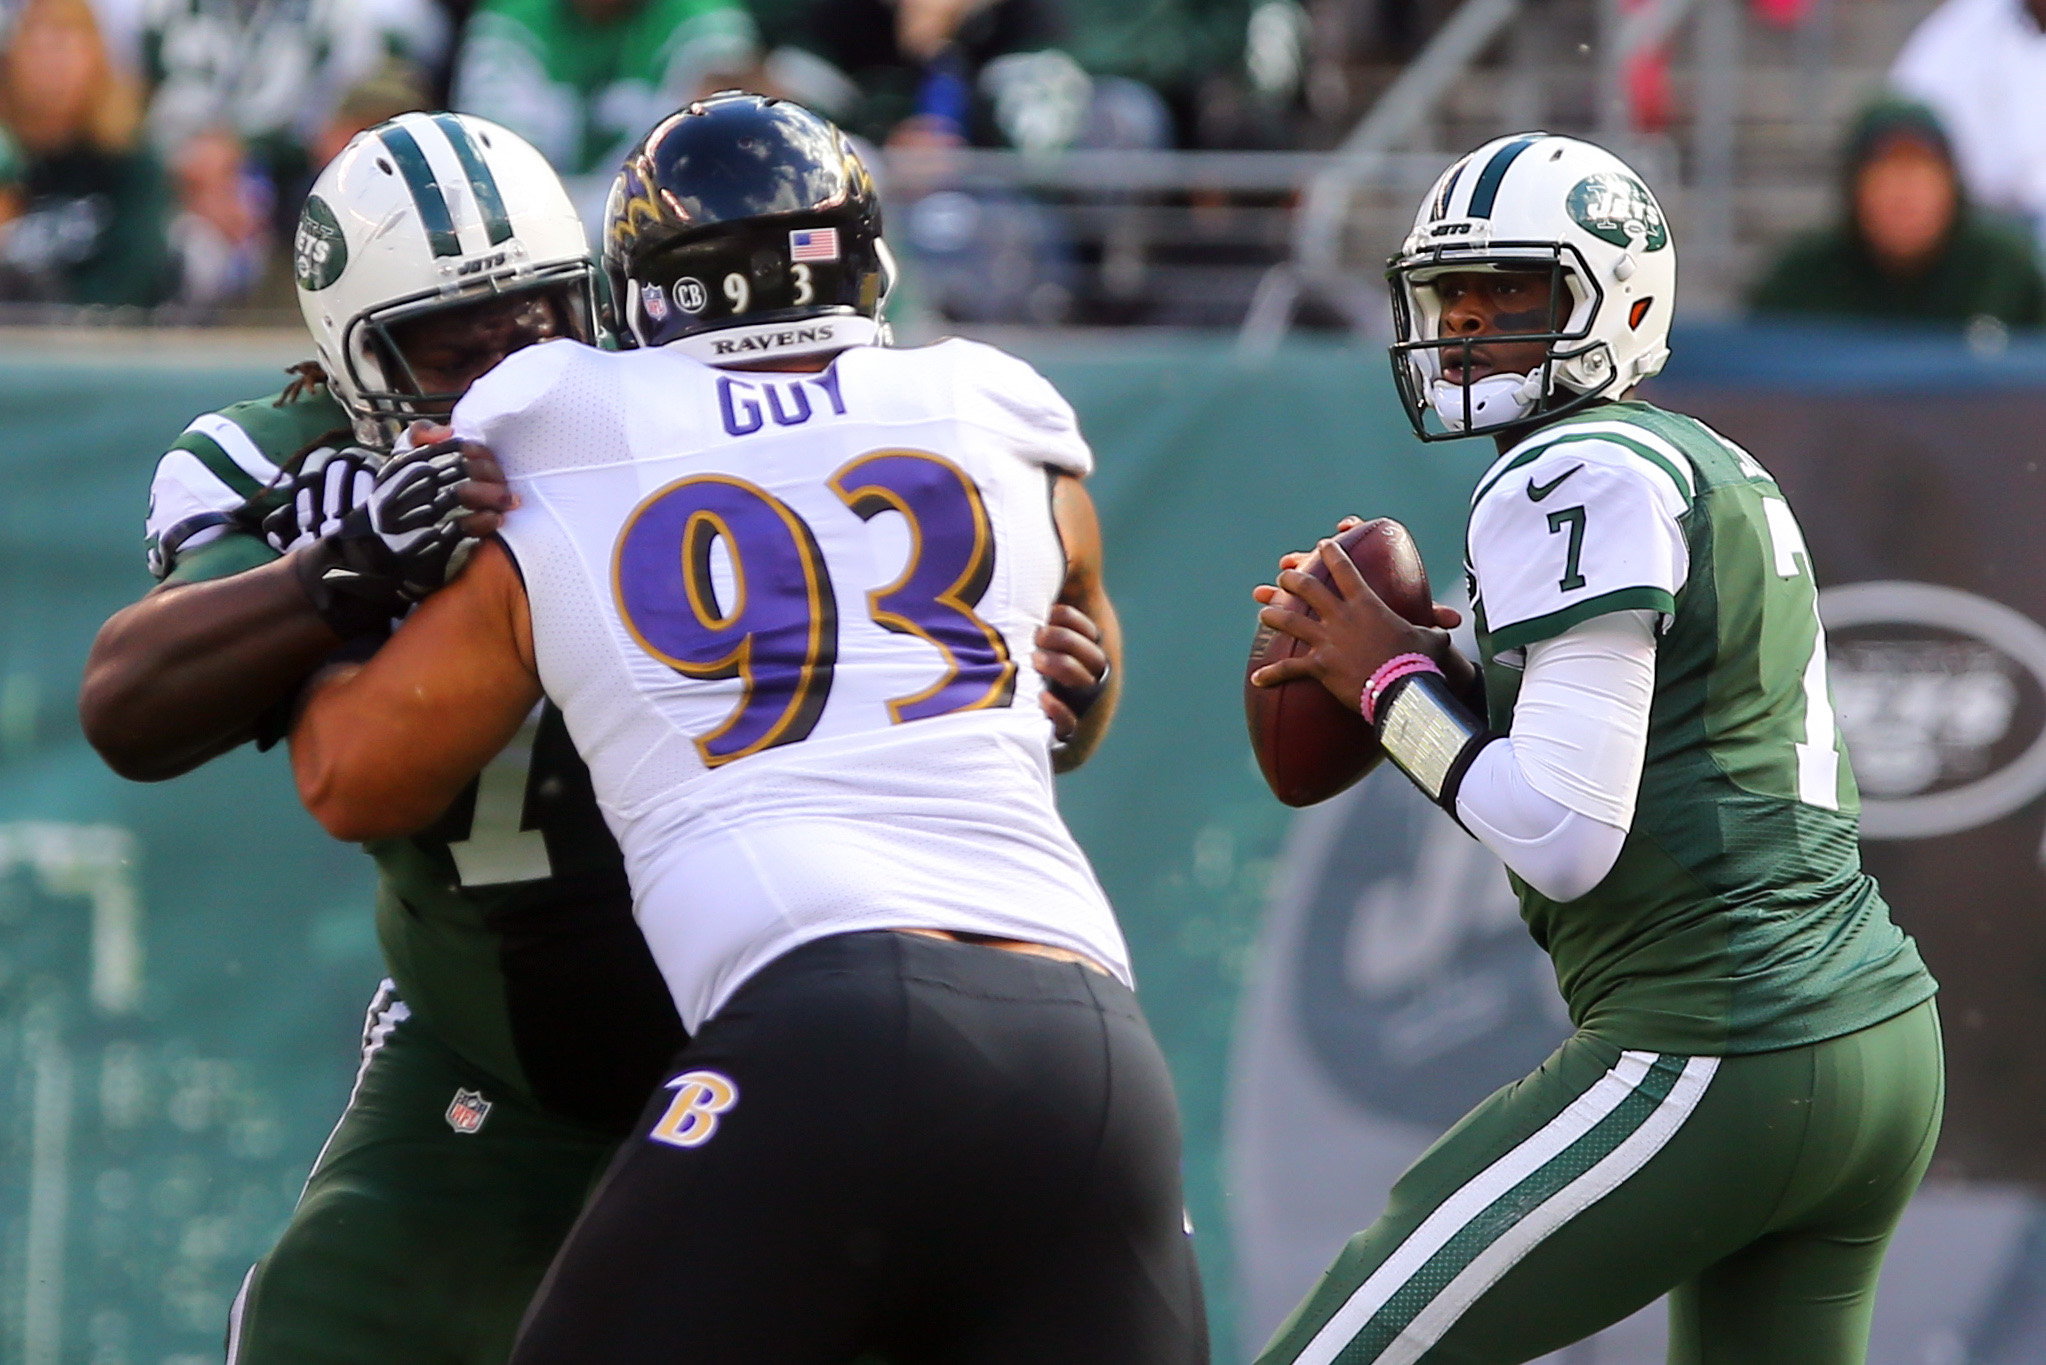 If Healthy, Geno Smith Should Be The New York Jets Starting QB 